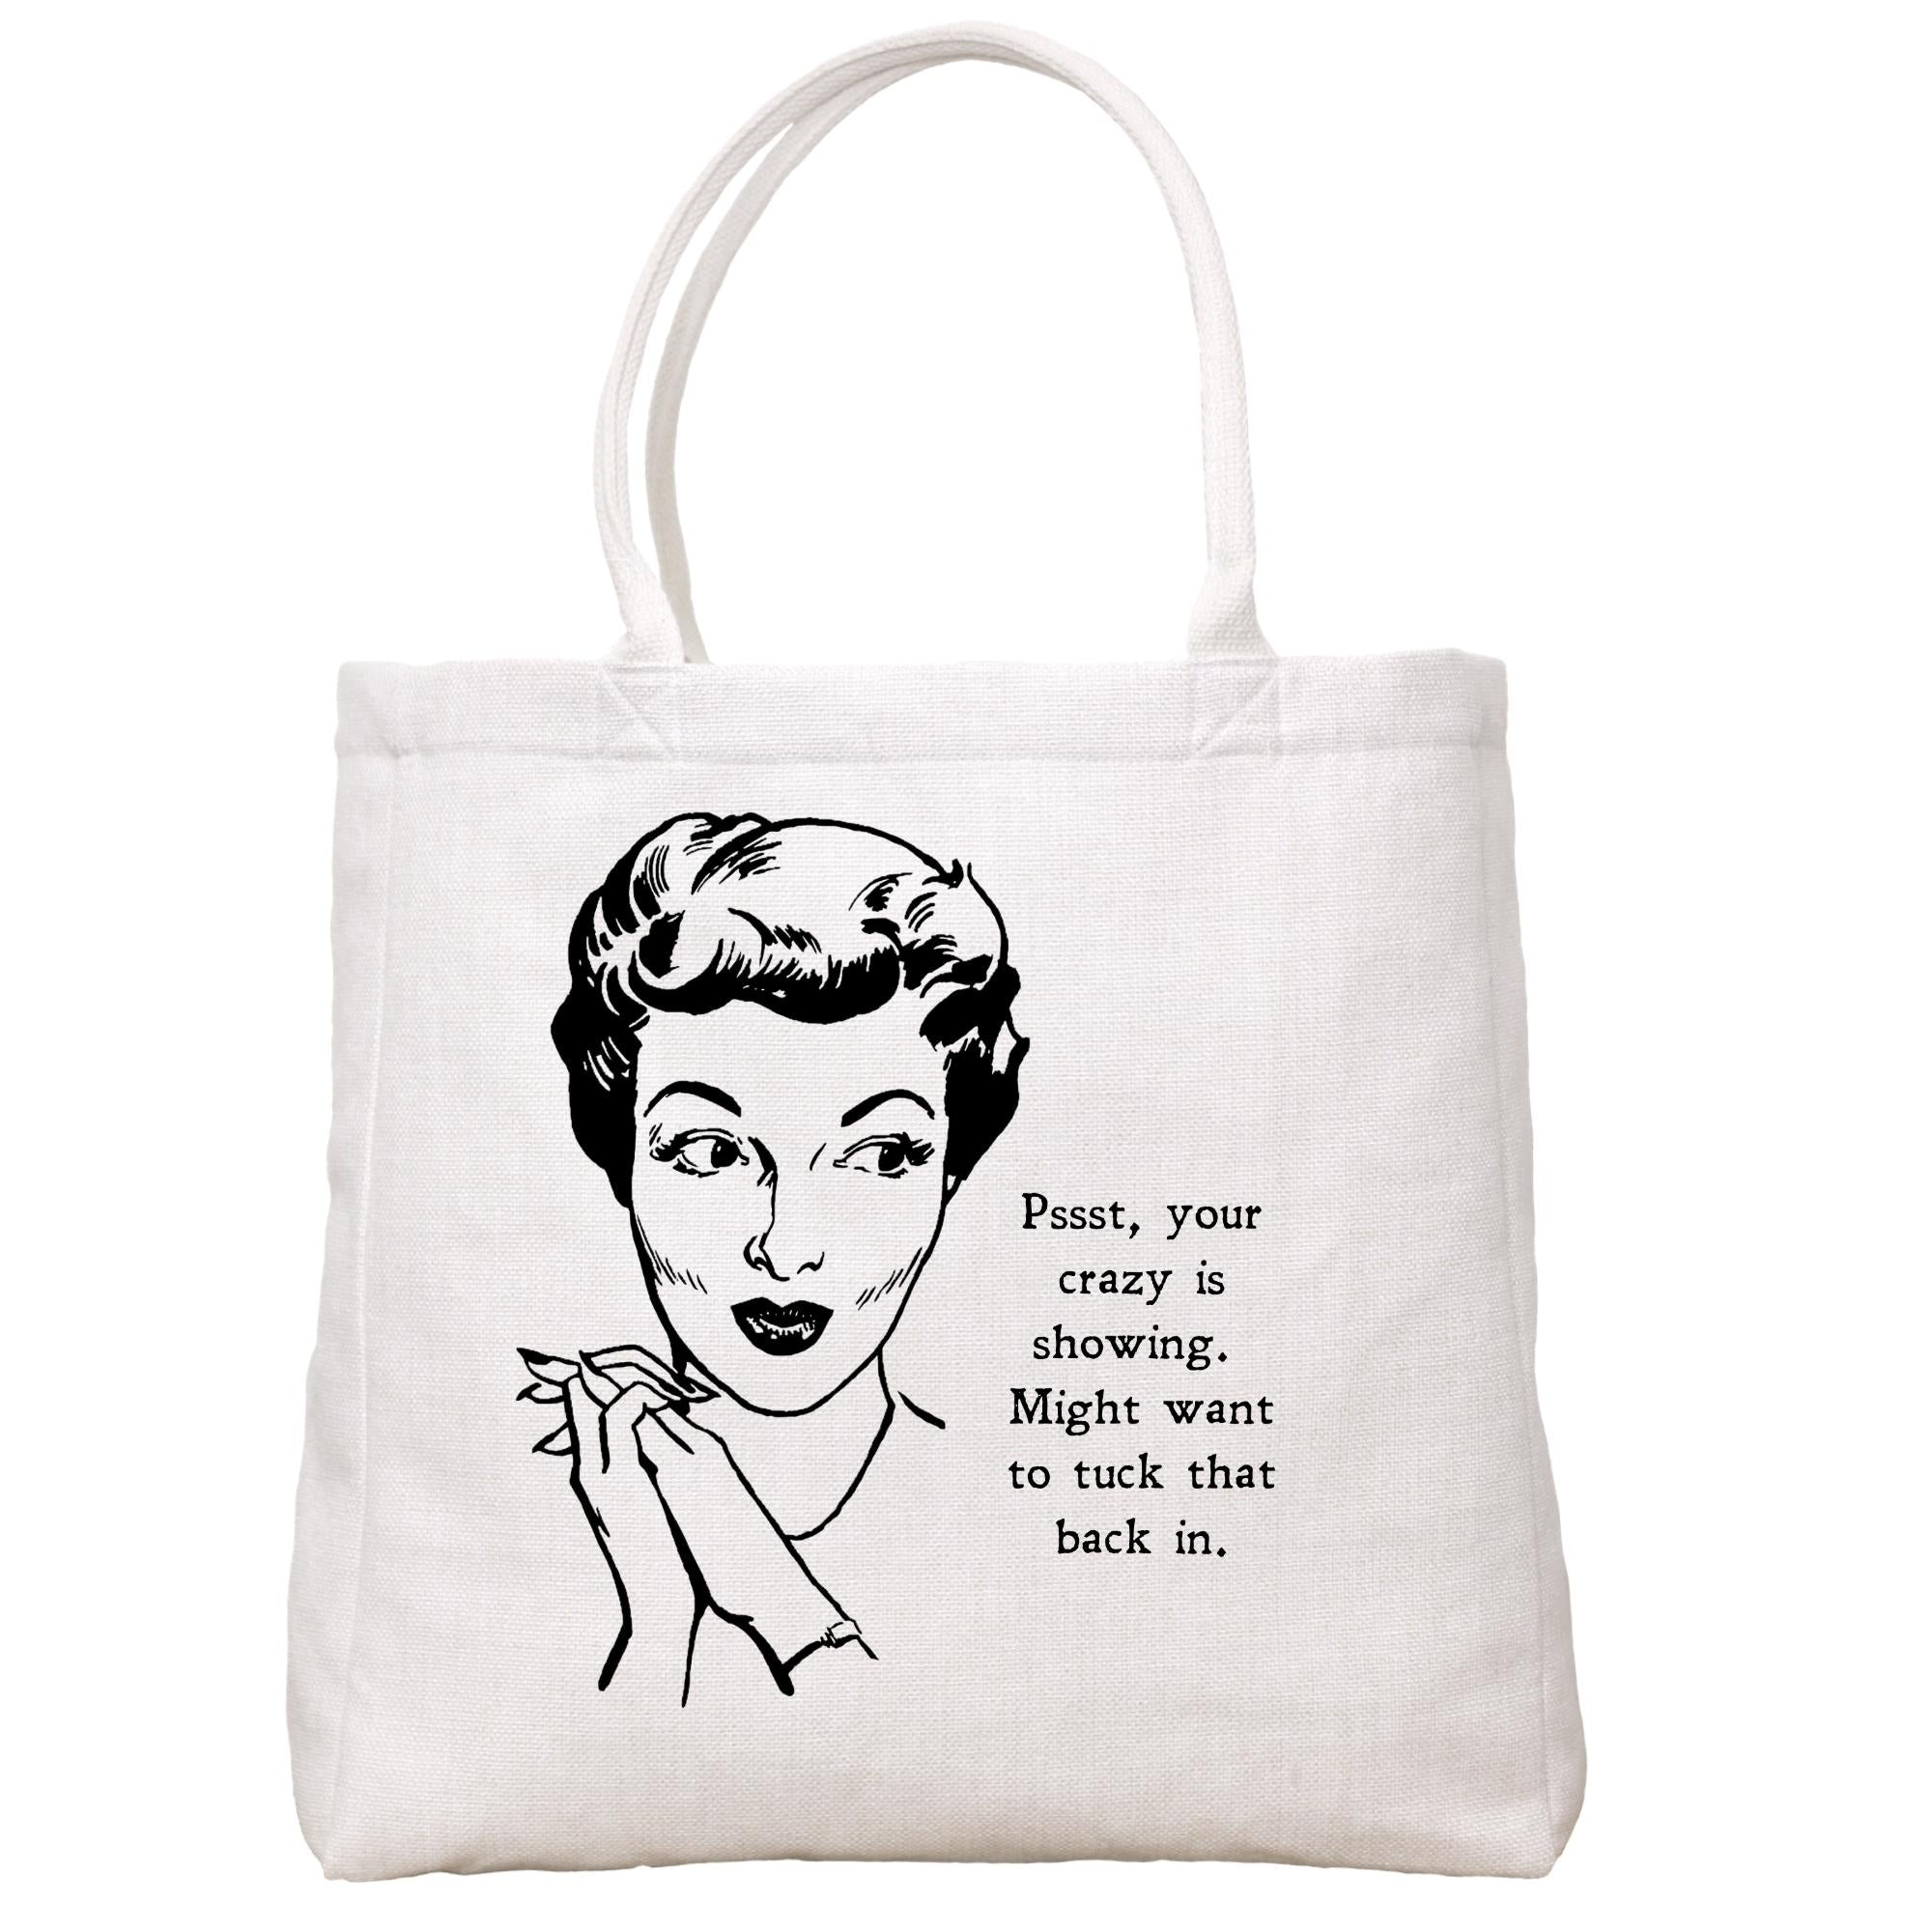 Crazy is Showing Tote Bag Tote Bag - Southern Sisters